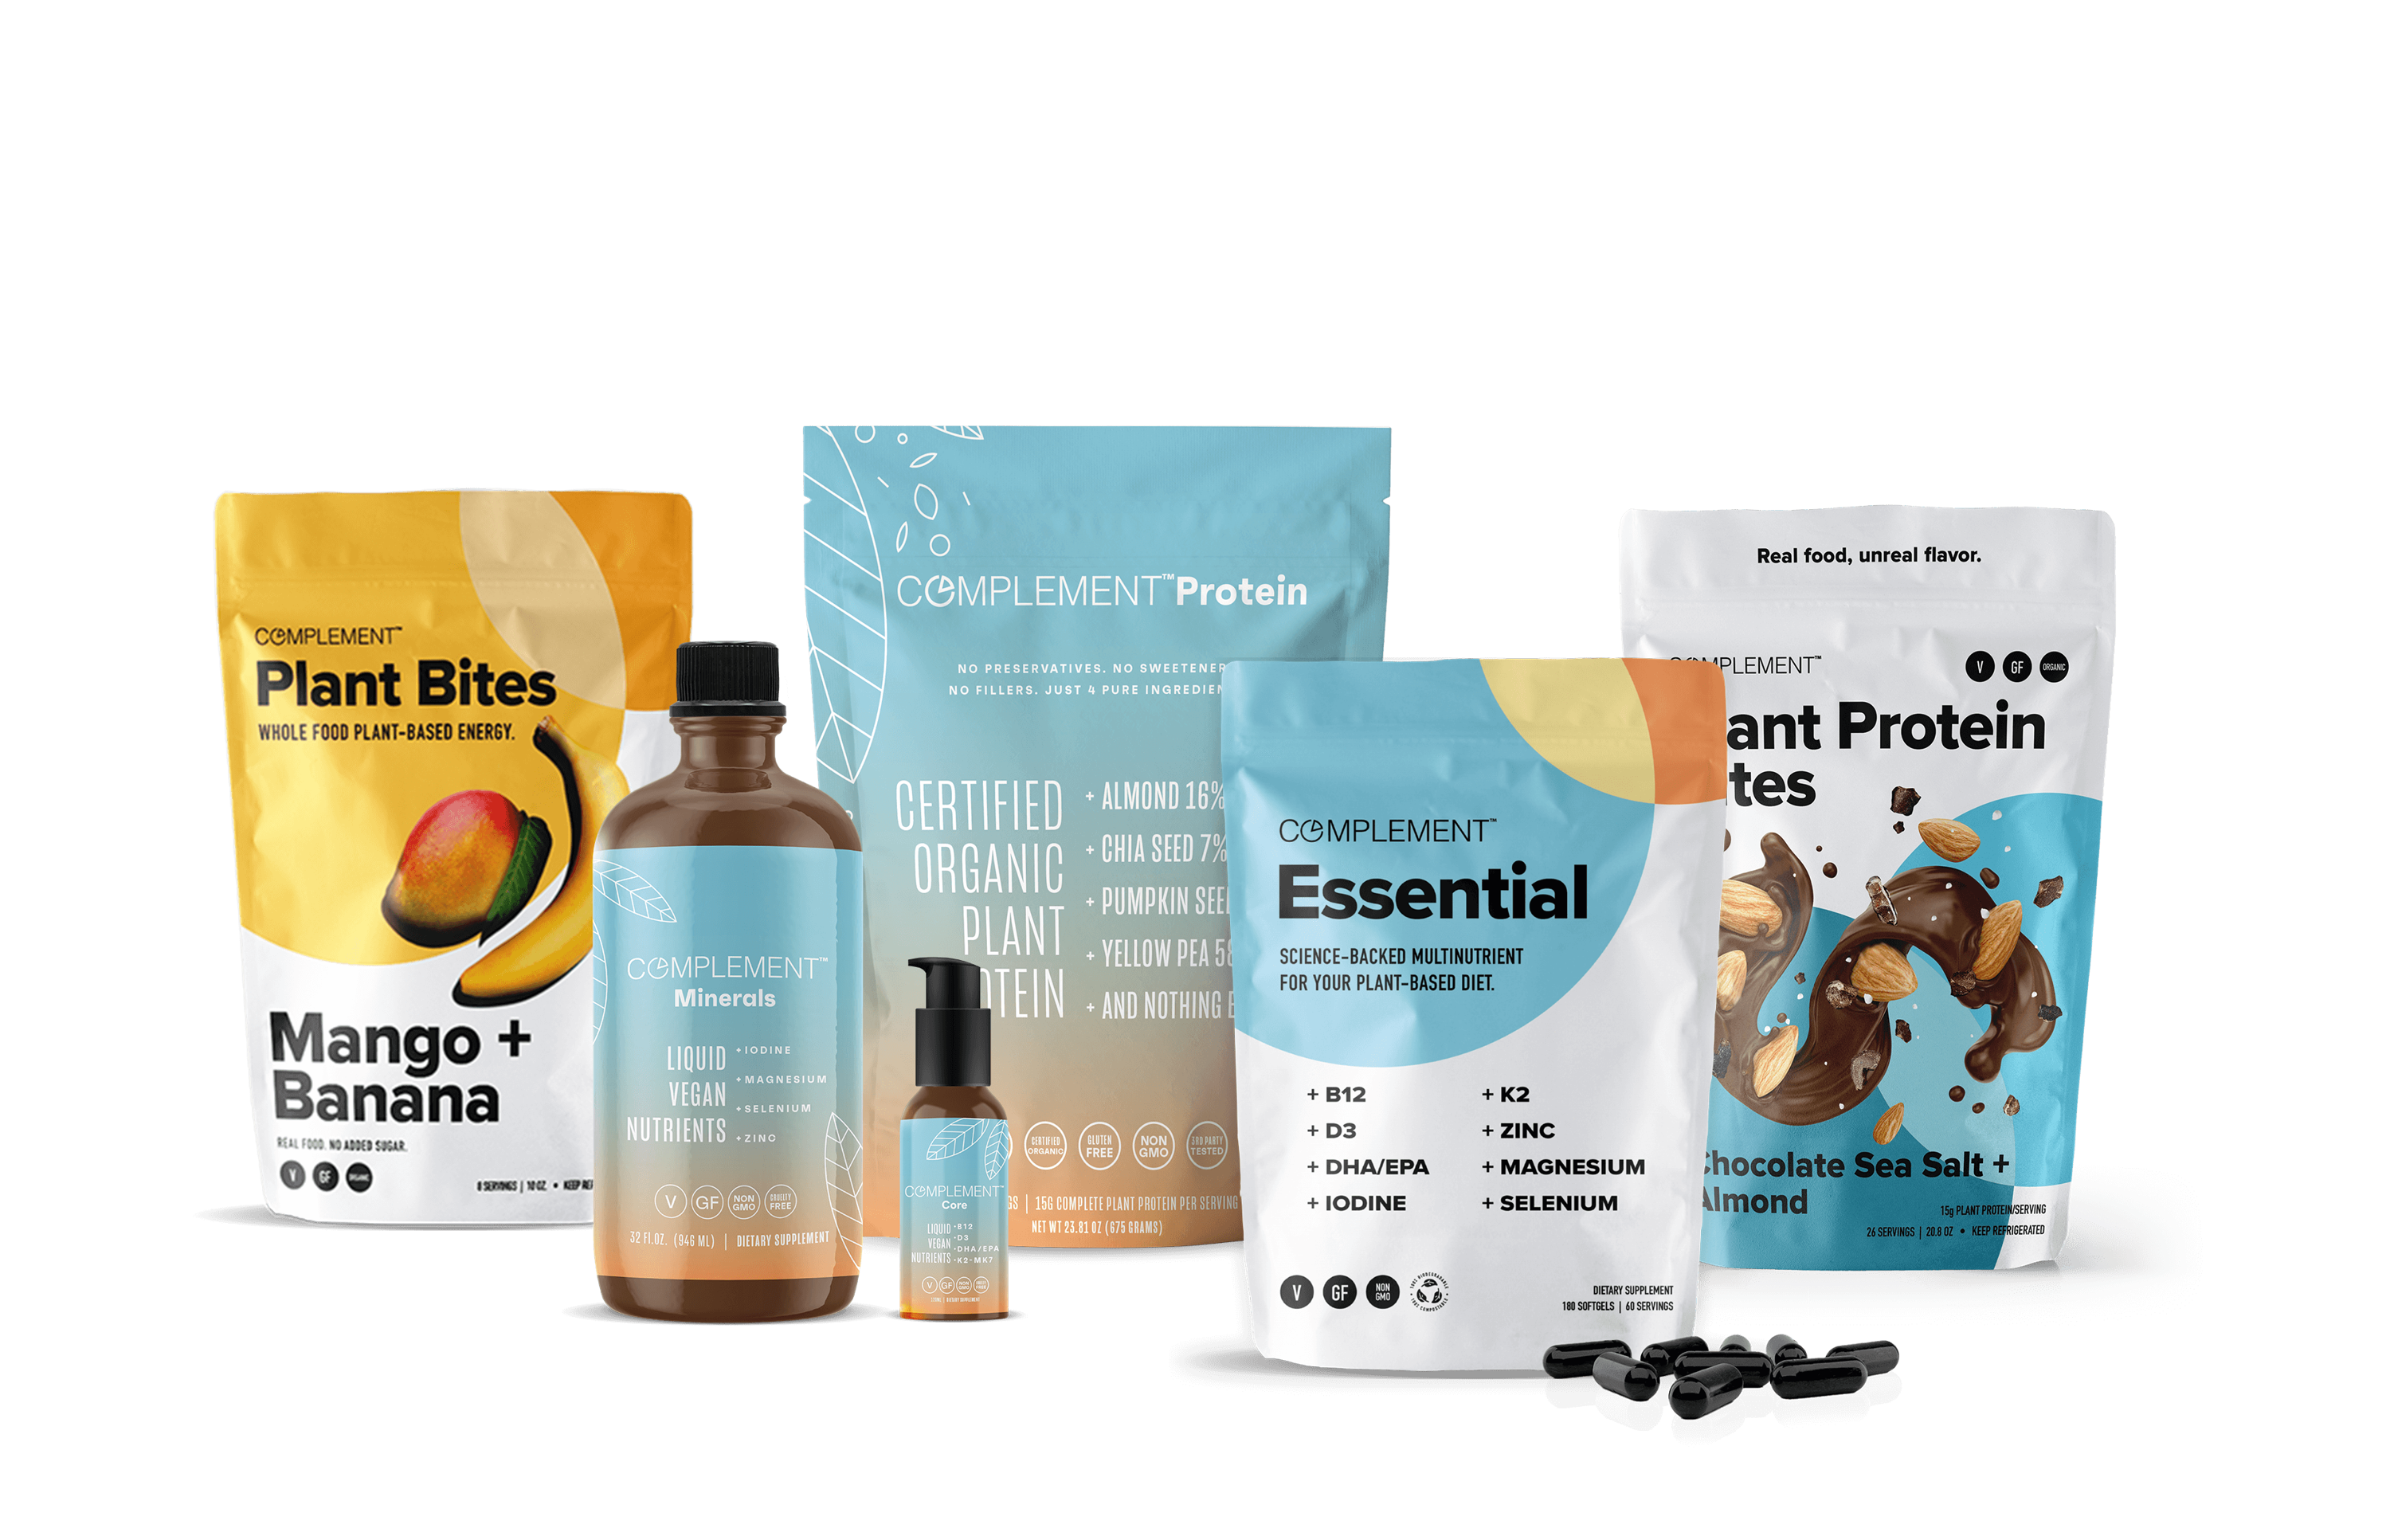 Complement Products - Plant Bites, Complement Essential, Complement Protein, Essential Vegan Nutrients and Plant Protein Bites